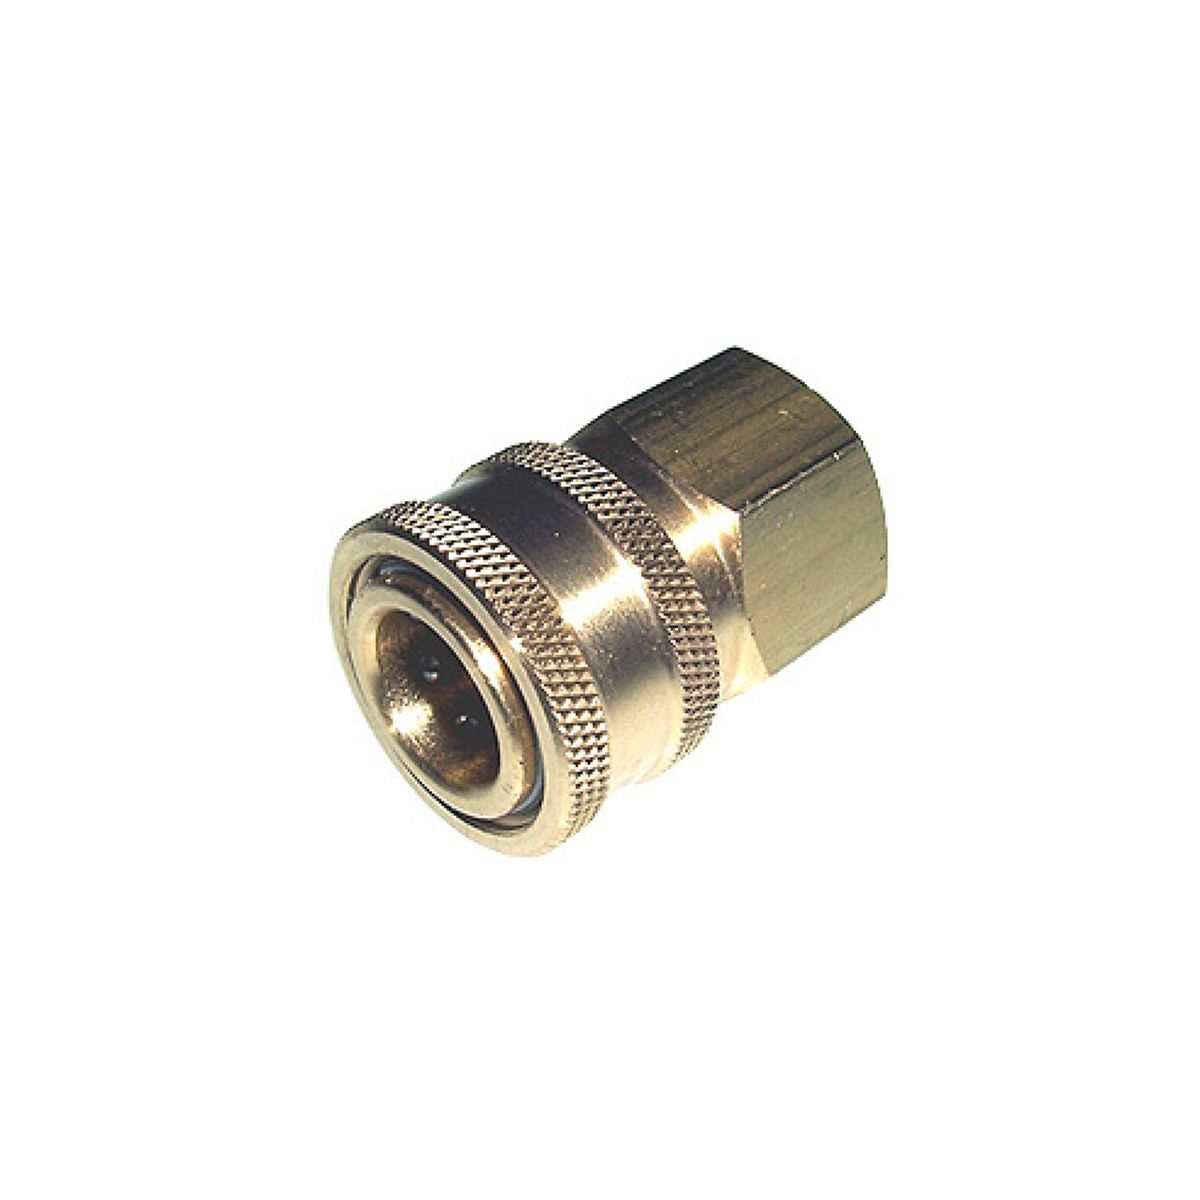 22MM FEMALE X 18MM MALE PRESSURE WASHER SCREW HOSE CONNECTOR FITTING ADAPTER 